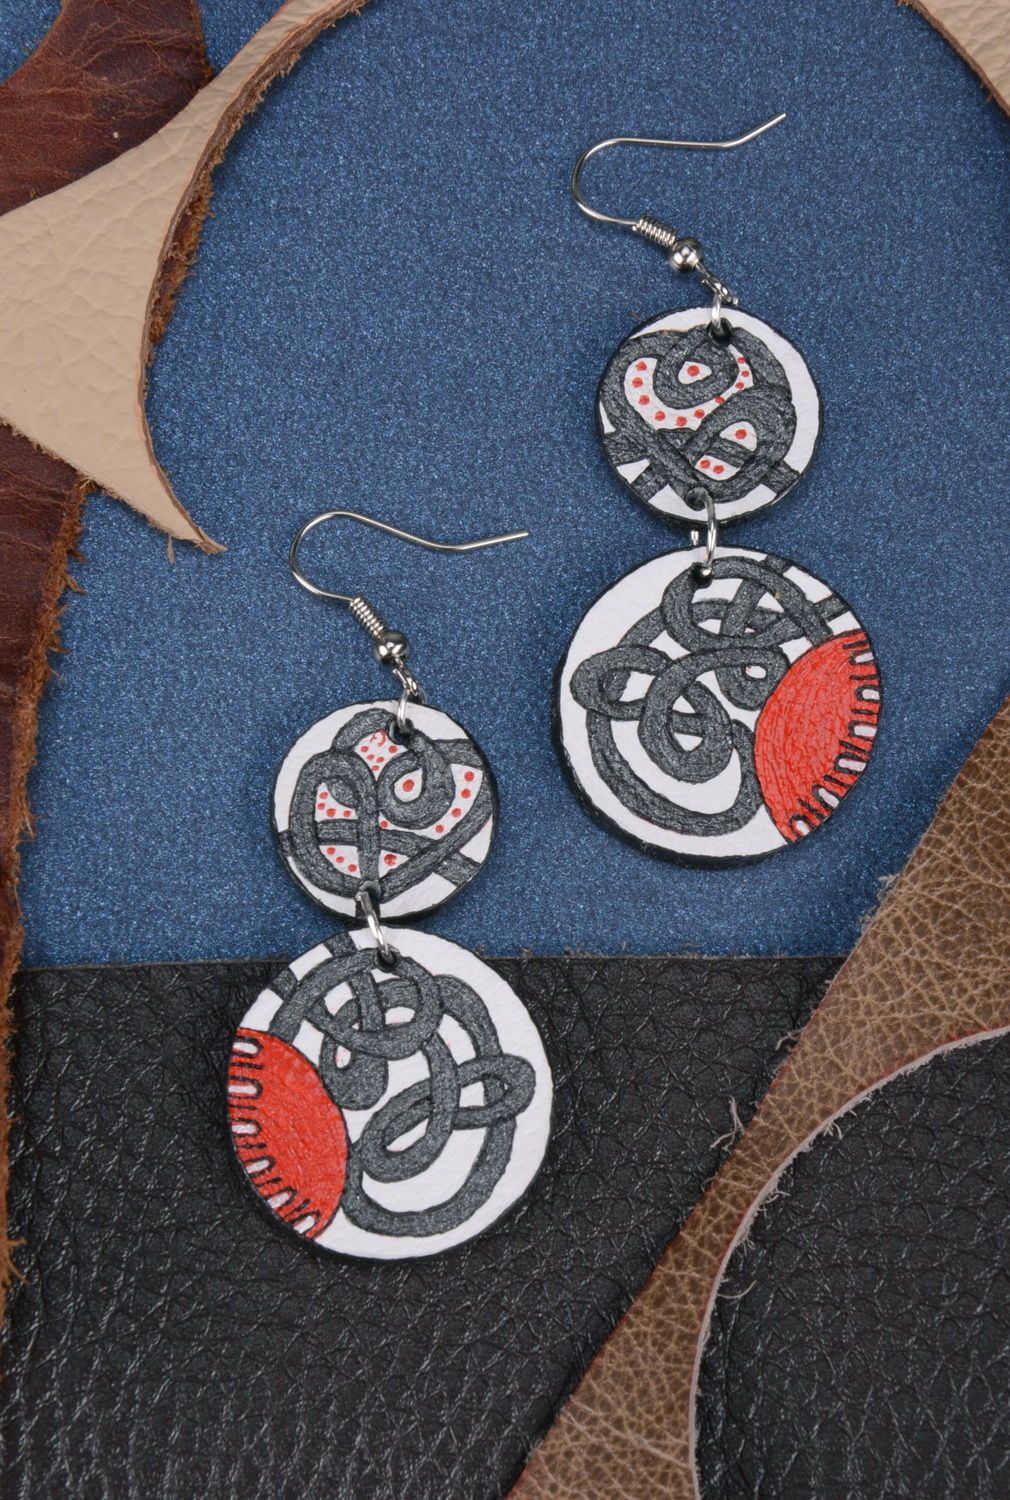 Pendant earrings made of leather with ornament photo 1